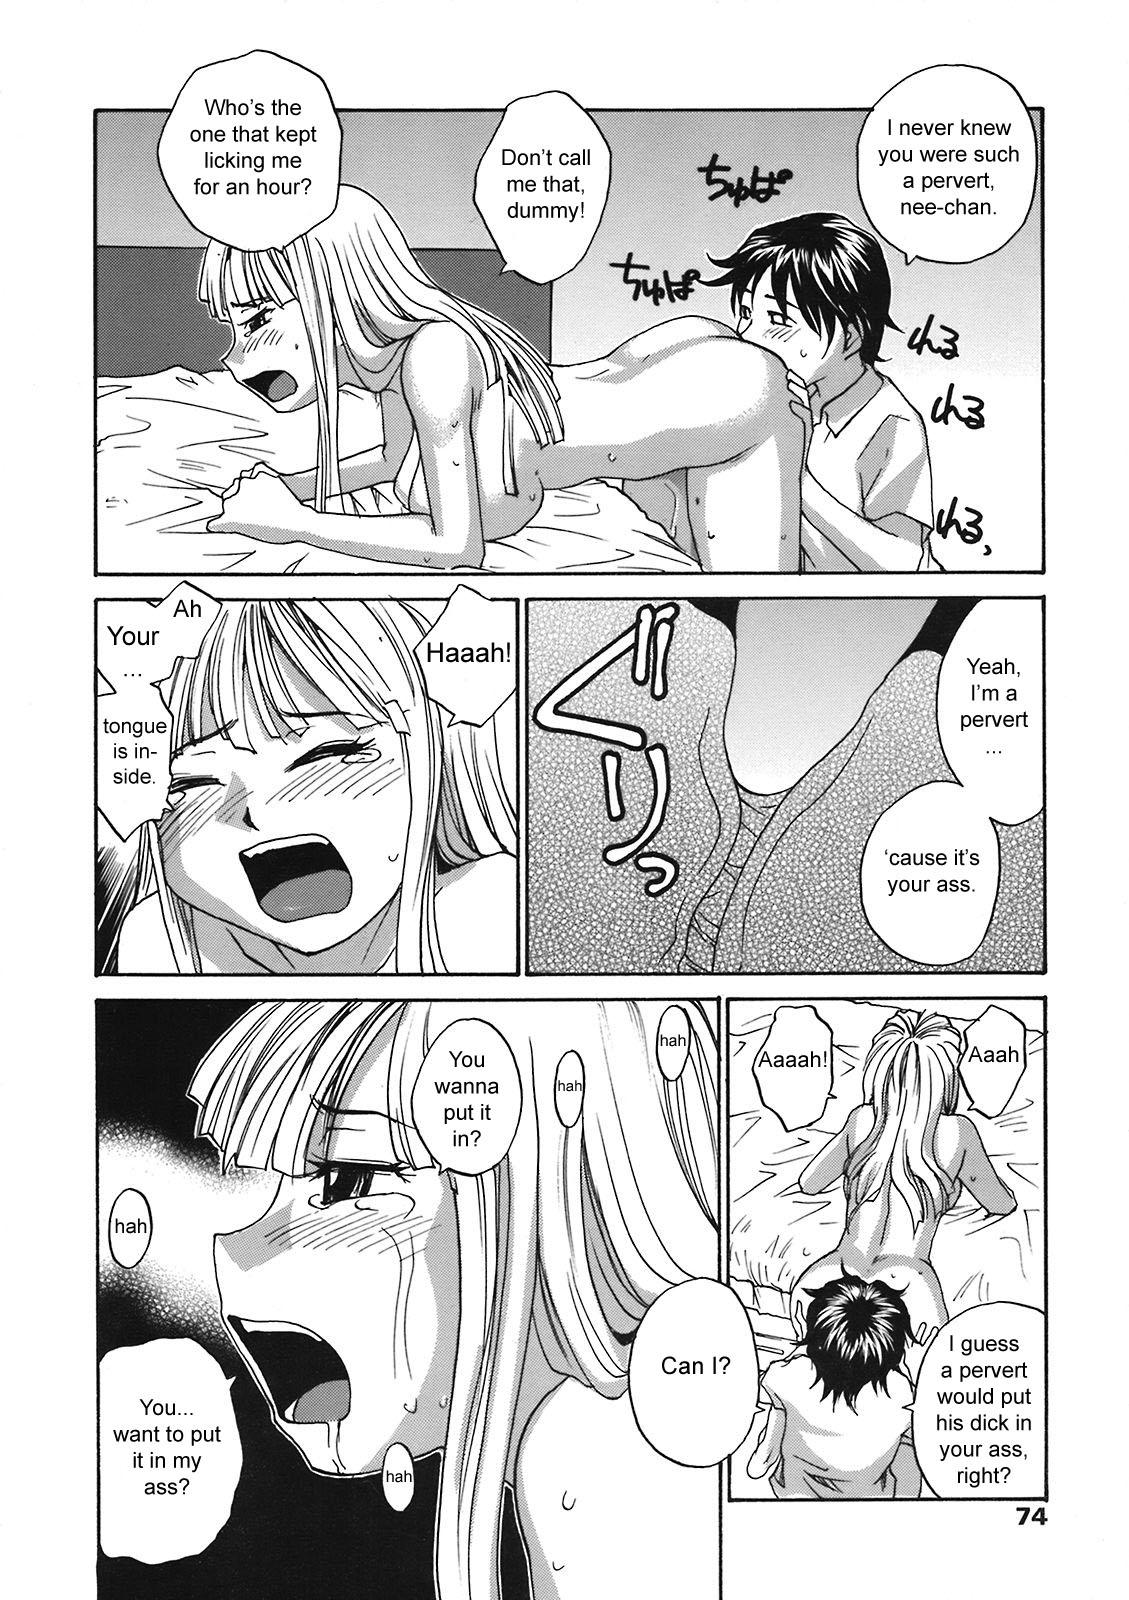 Real Amature Porn Back to Nee-chan Face - Page 8